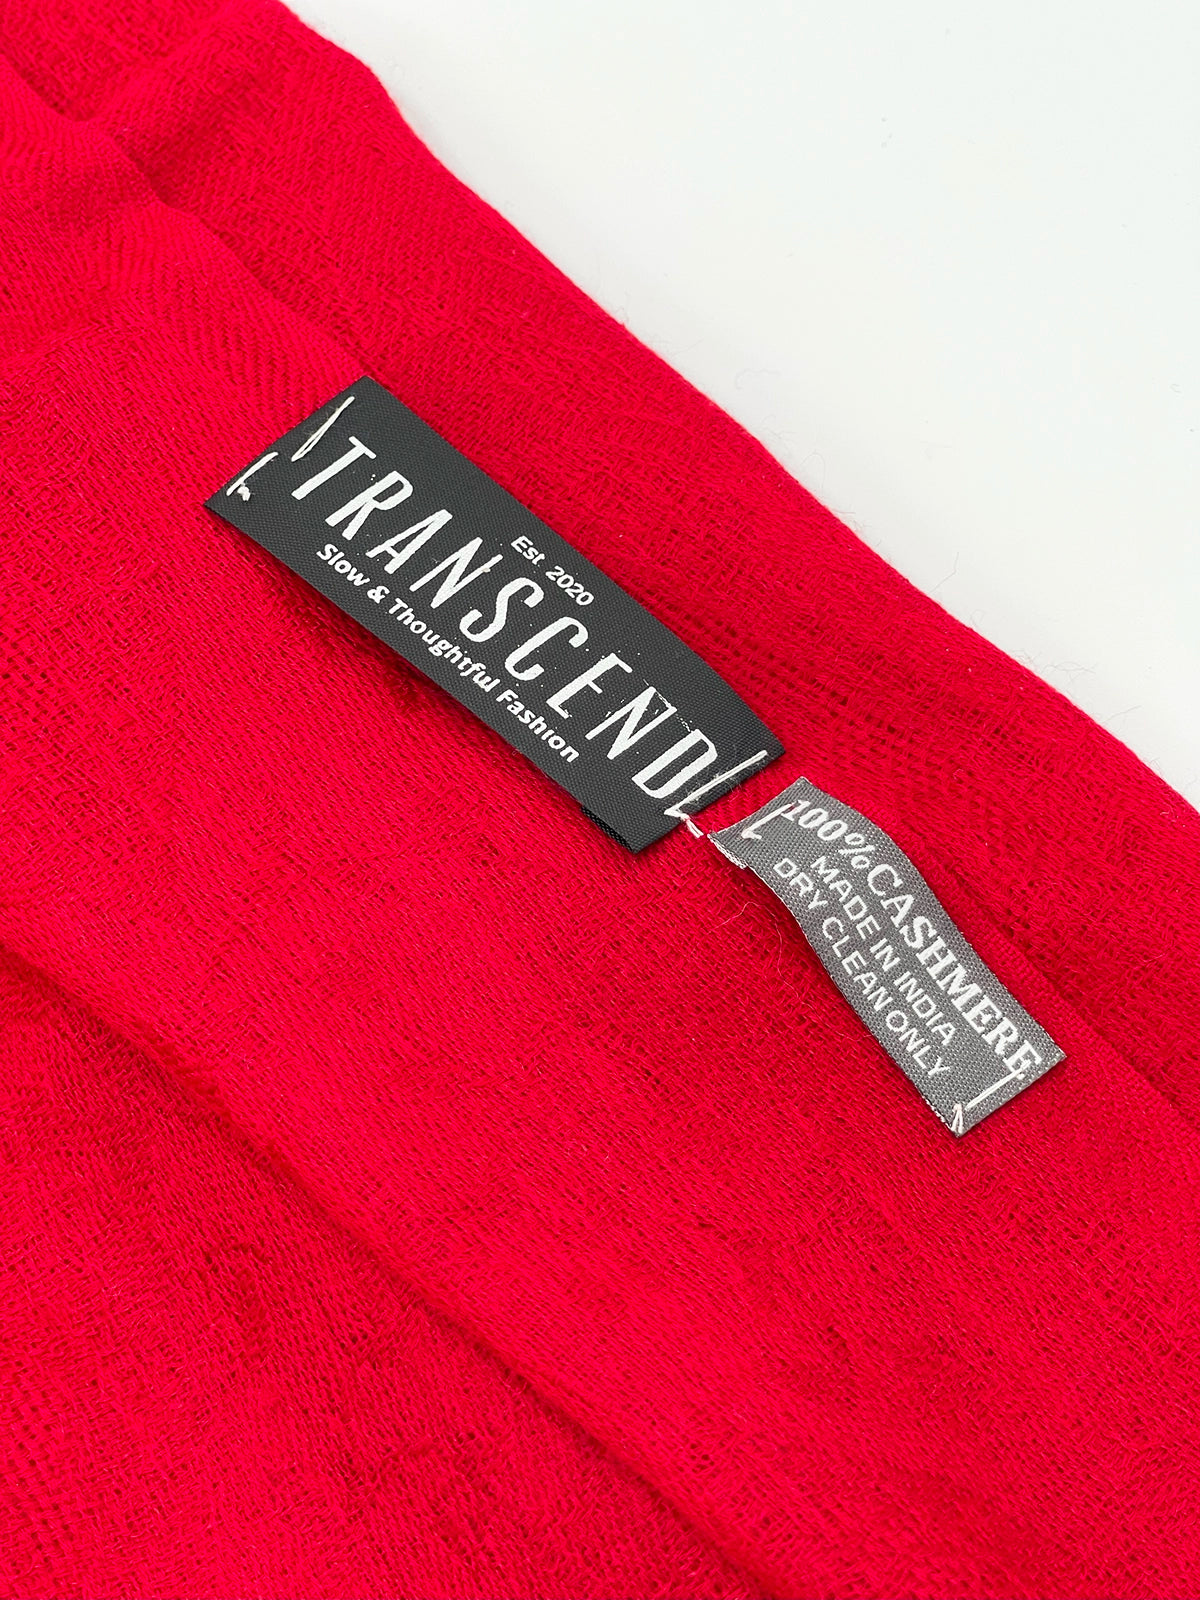 Cashmere Scarf - BRIGHT RED